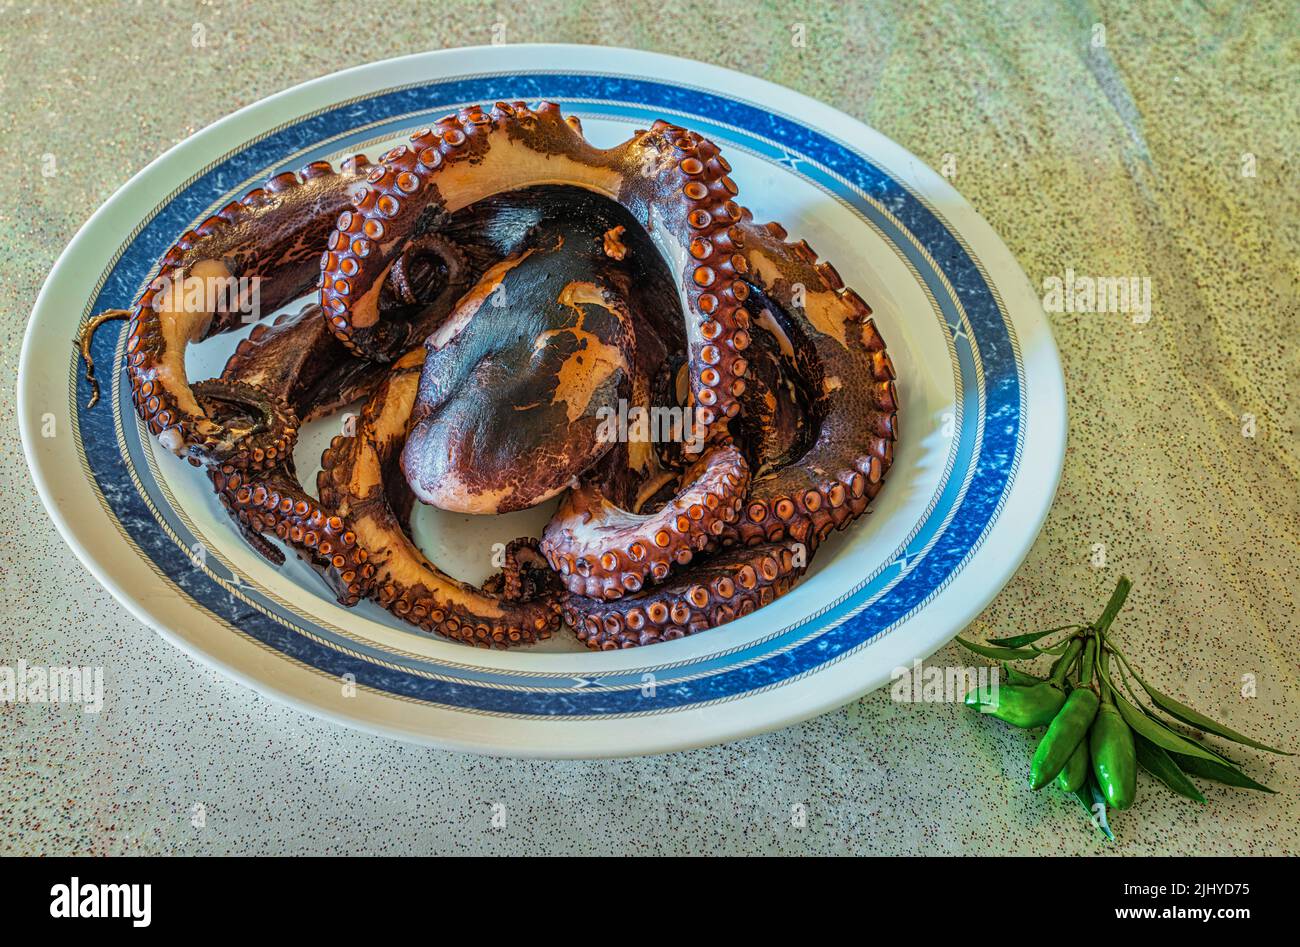 A freshly caught octopus placed in a blue and white plate ready to be cooked. Abruzzo, Italy, Europe Stock Photo